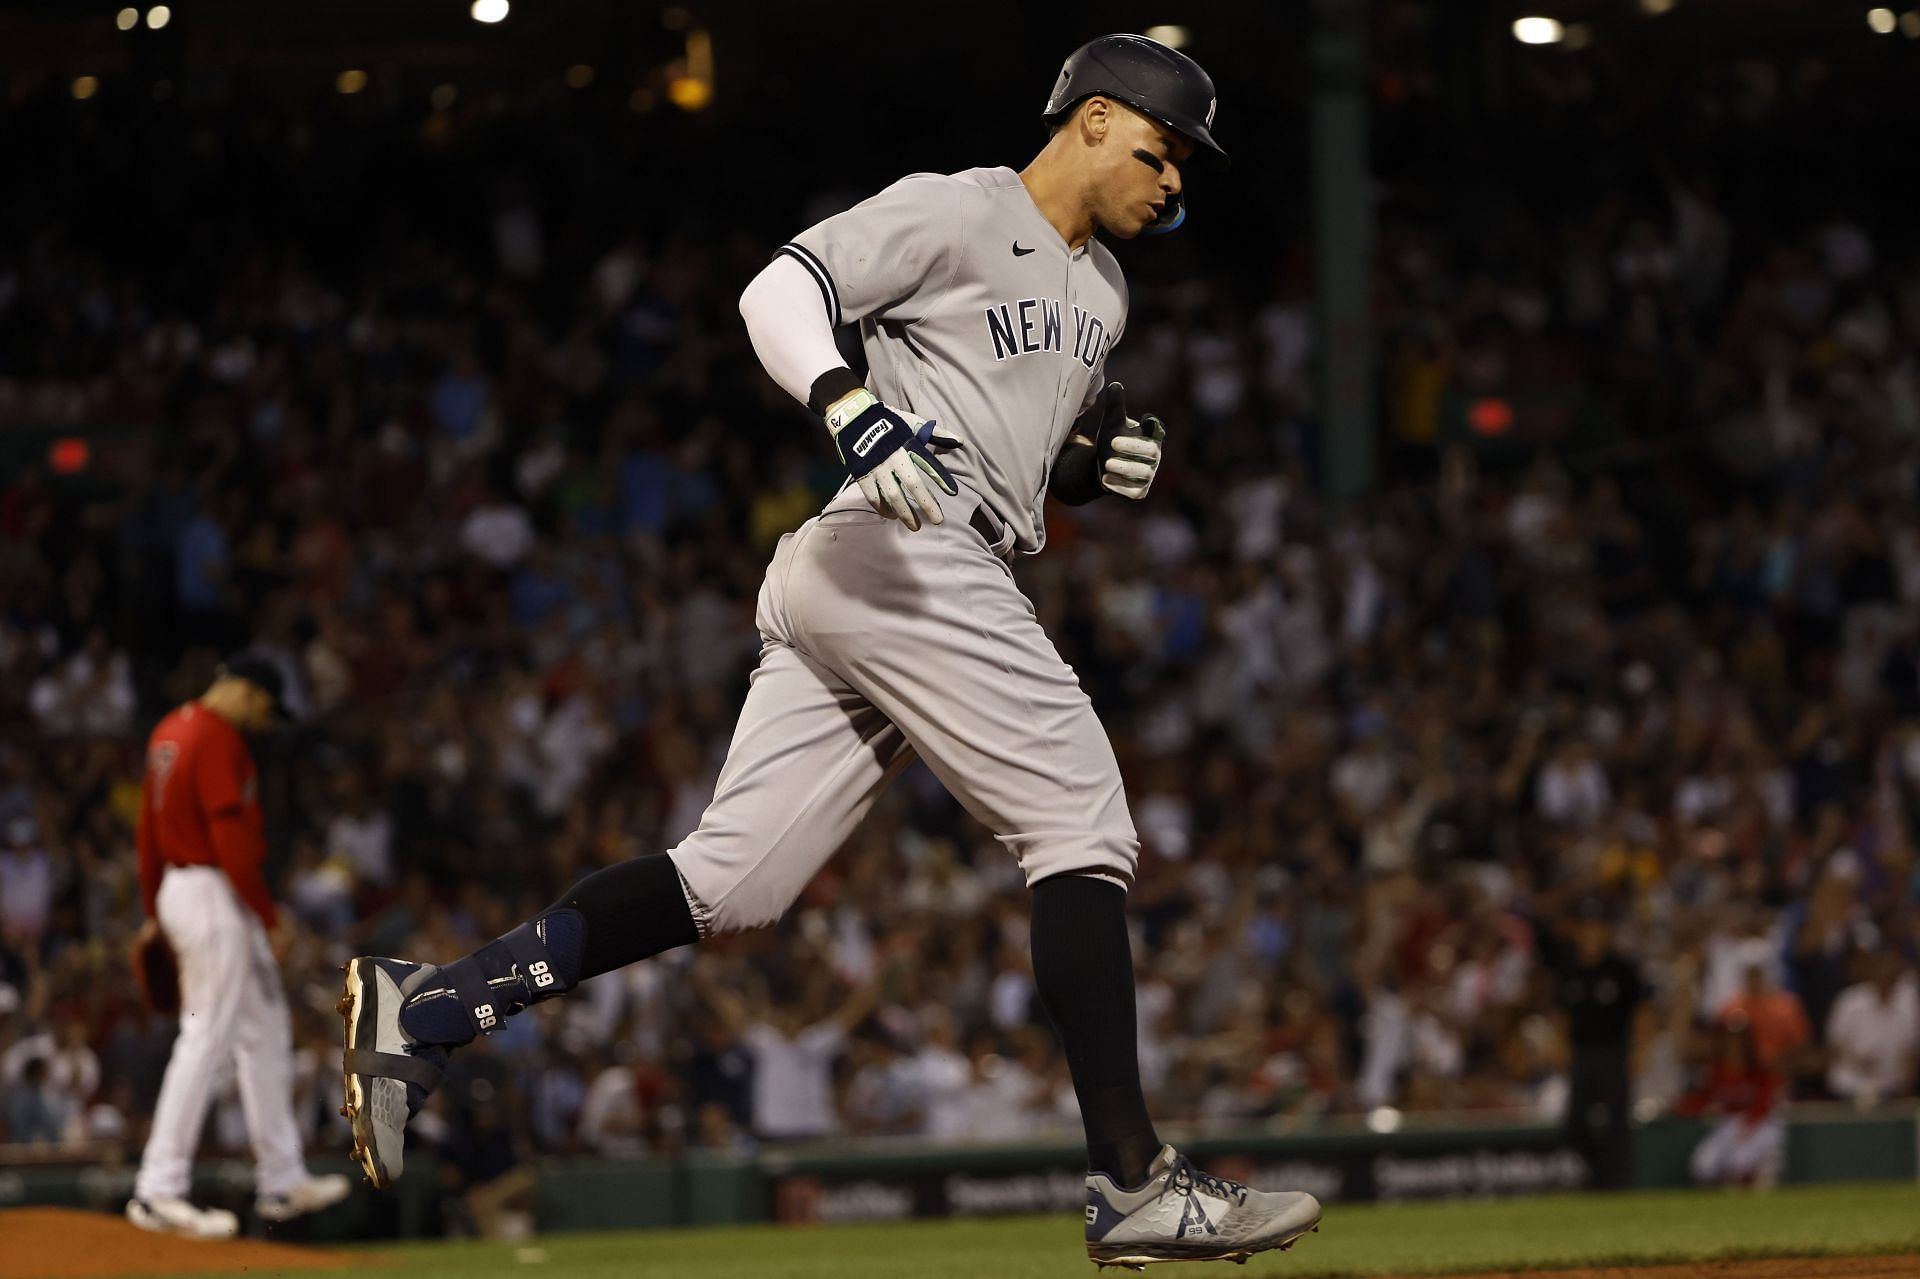 Aaron Judge #99 of the New York Yankees rounds the bases after his solo home run off of pitcher Nathan Eovaldi #17 of the Boston Red Sox during the third inning at Fenway Park on August 12, 2022